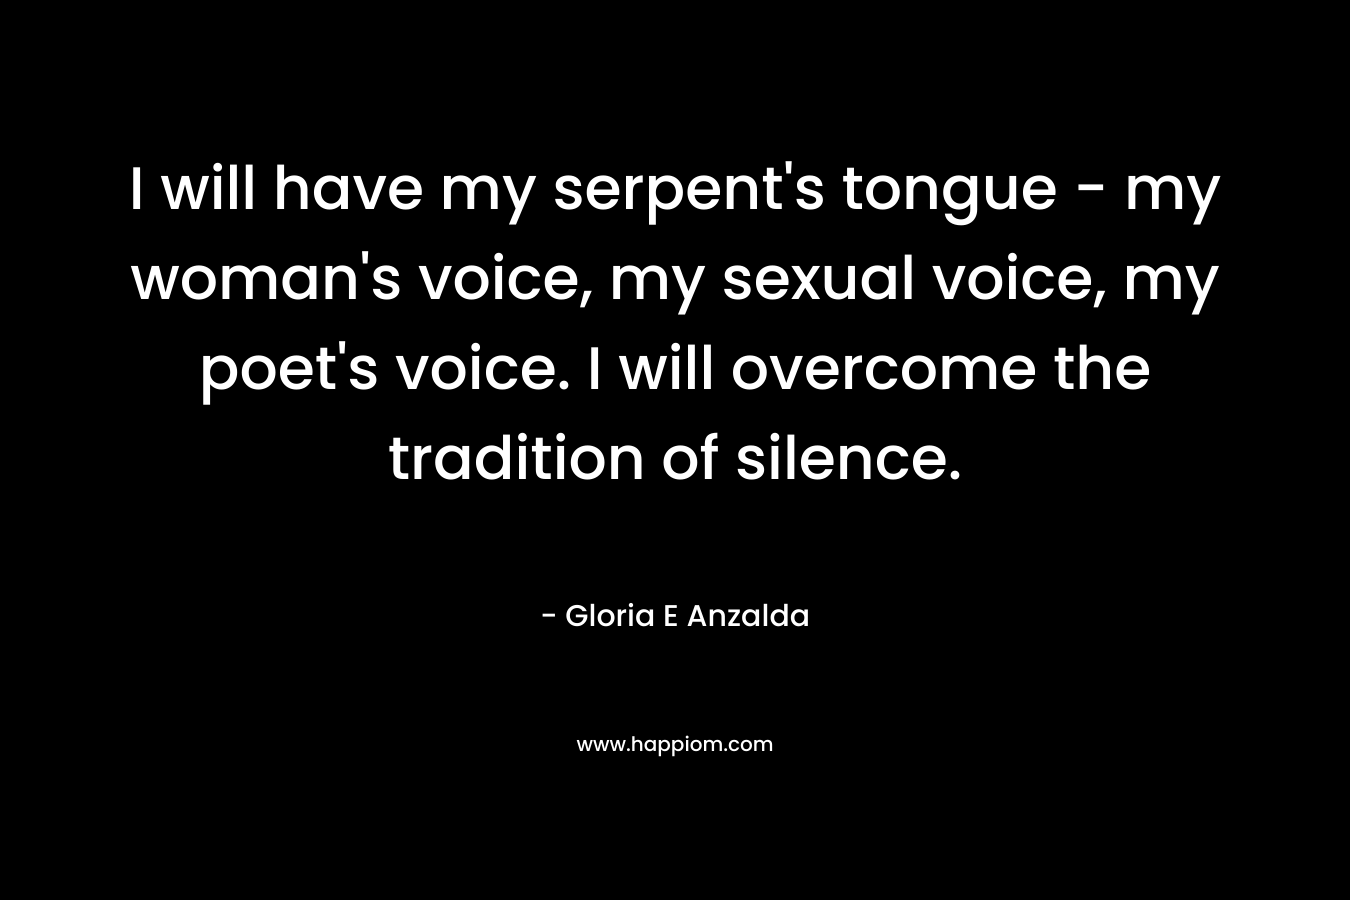 I will have my serpent's tongue - my woman's voice, my sexual voice, my poet's voice. I will overcome the tradition of silence.